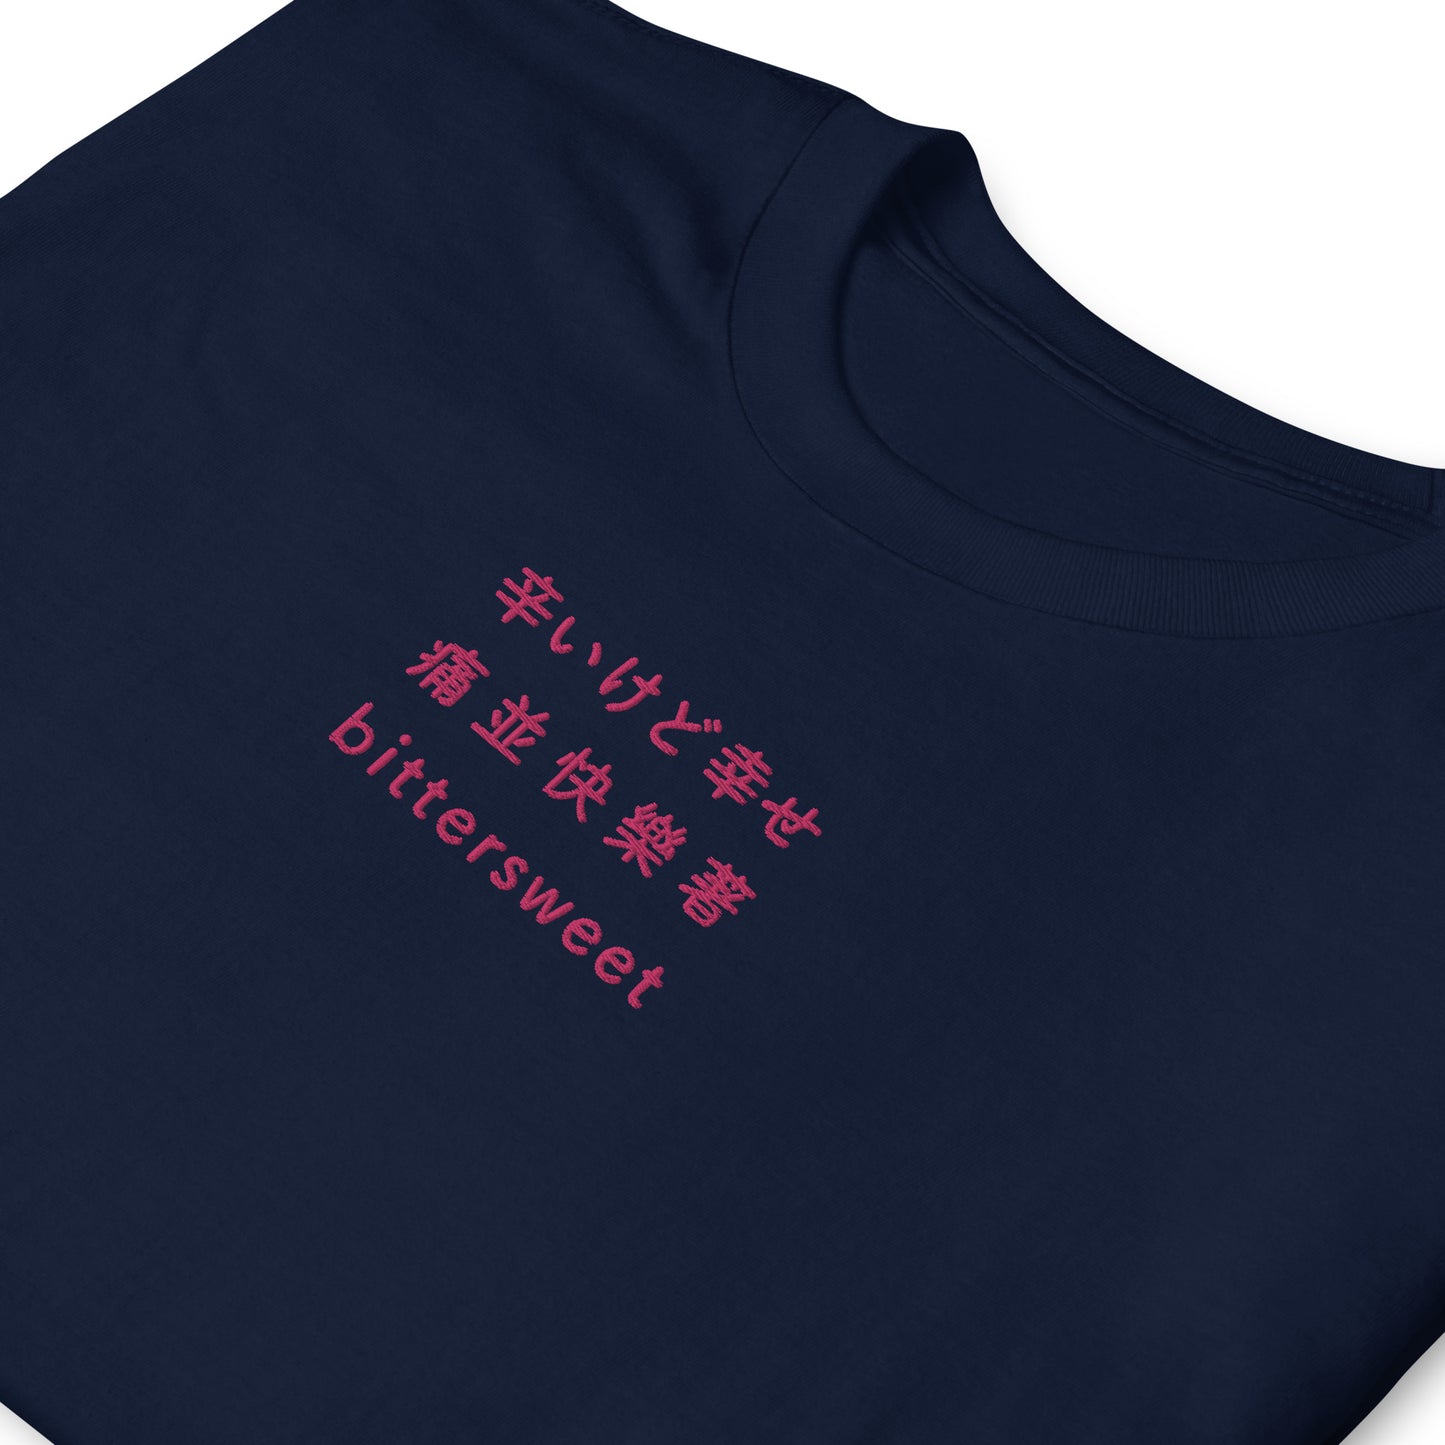 Navy High Quality Tee - Front Design with an Pink Embroidery "Bittersweet" in Japanese,Chinese and English